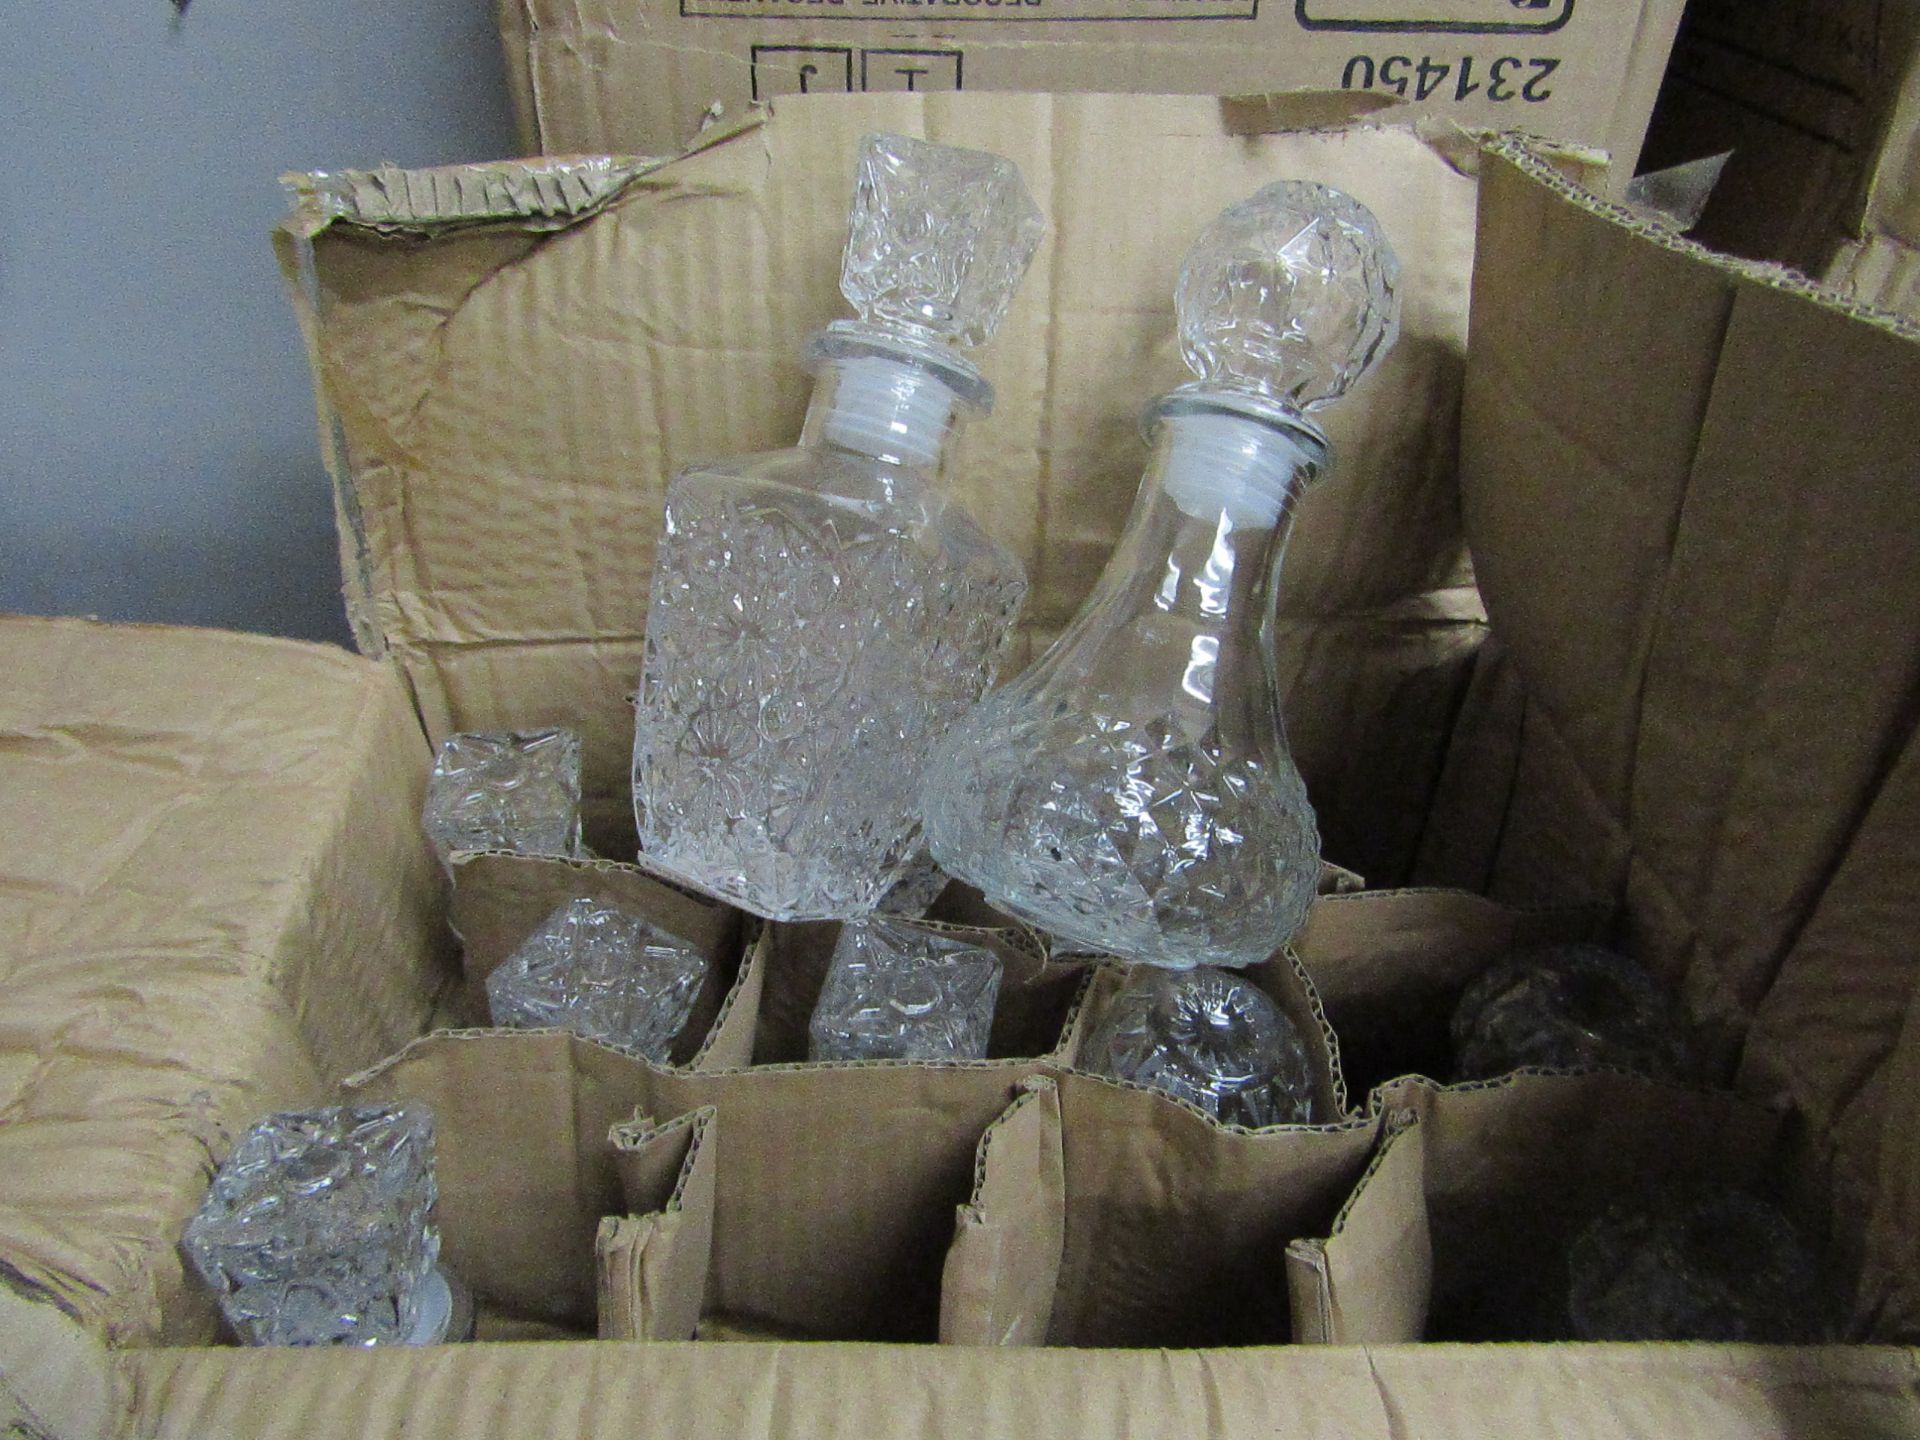 1x Box Containing 24 Decorative Decanters - Unchecked & Boxed.